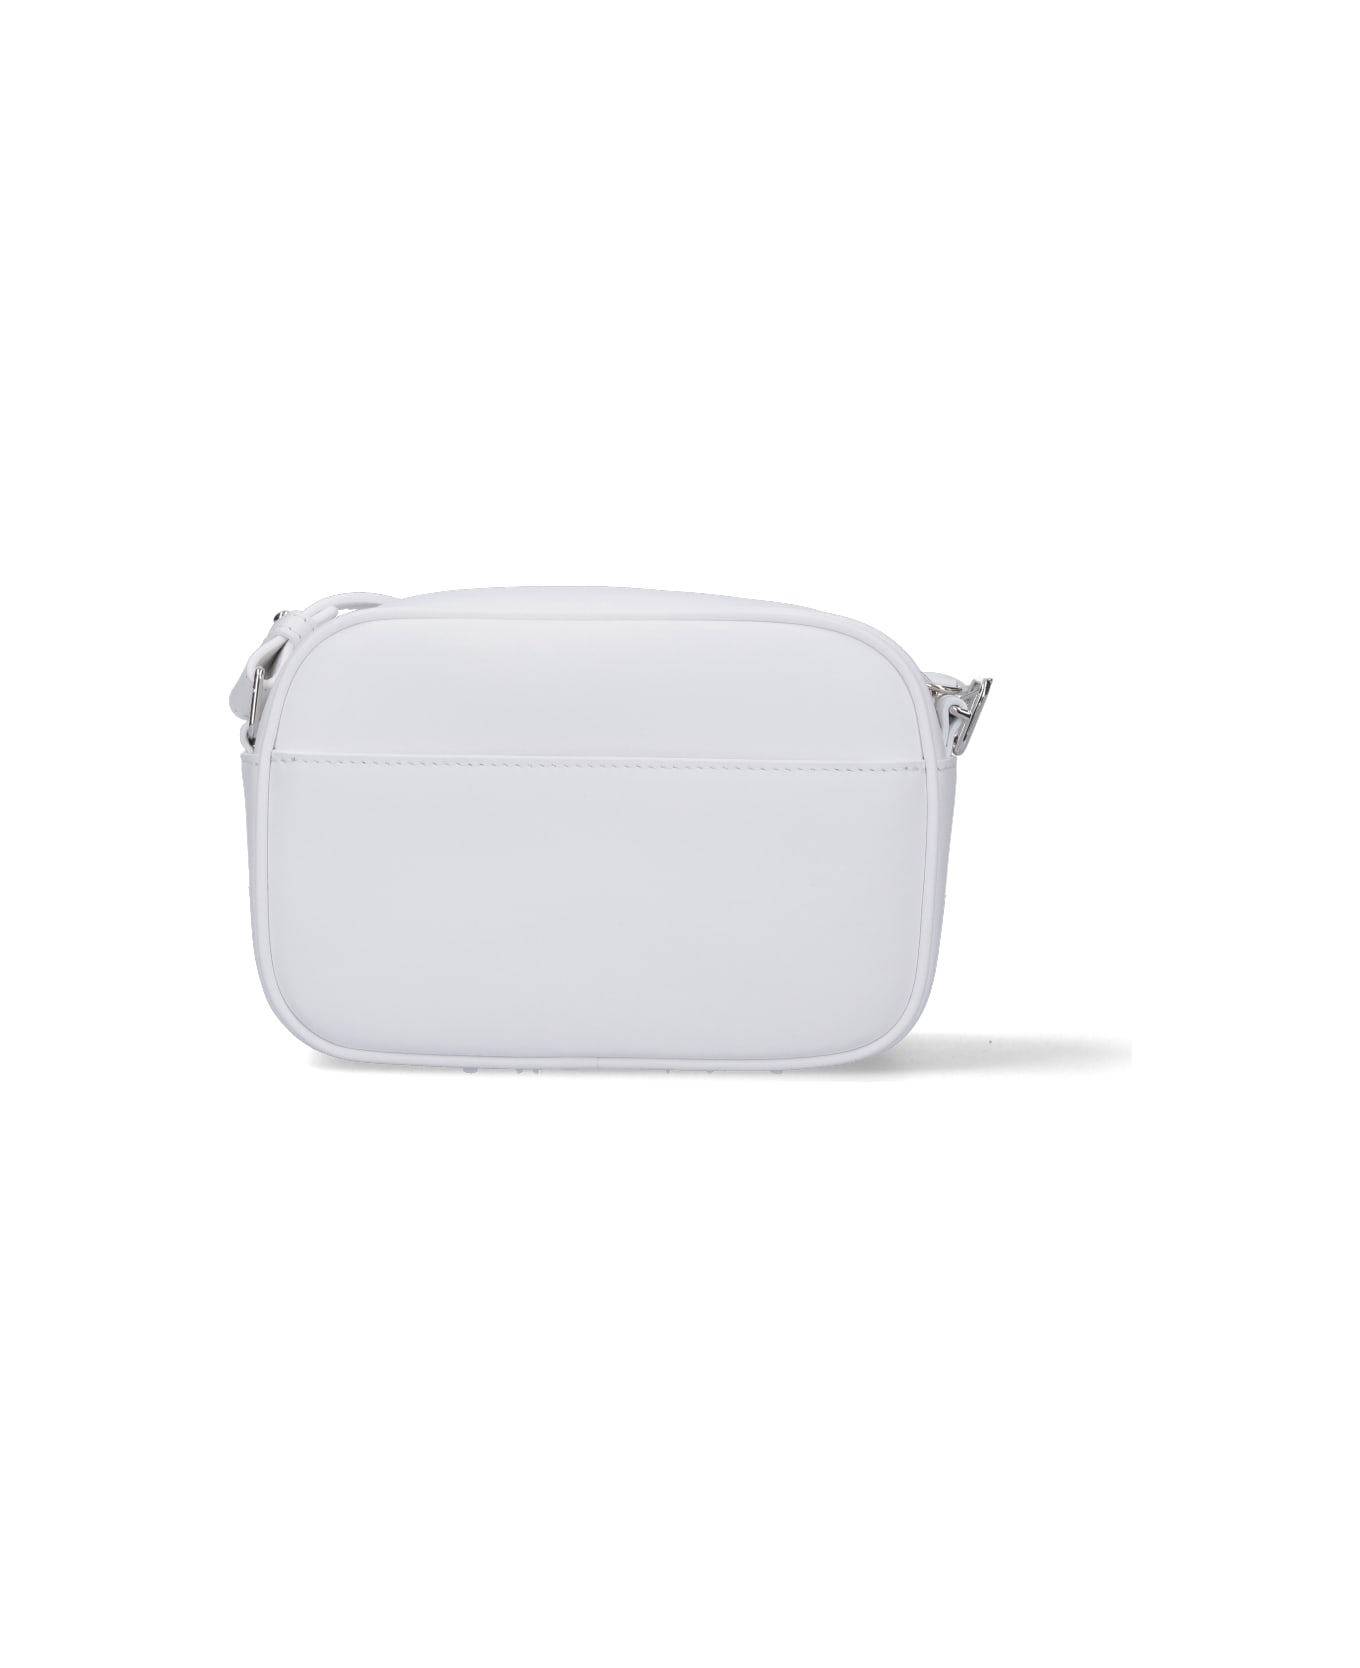 Courrèges "re-edition" Camera Bag - White ショルダーバッグ